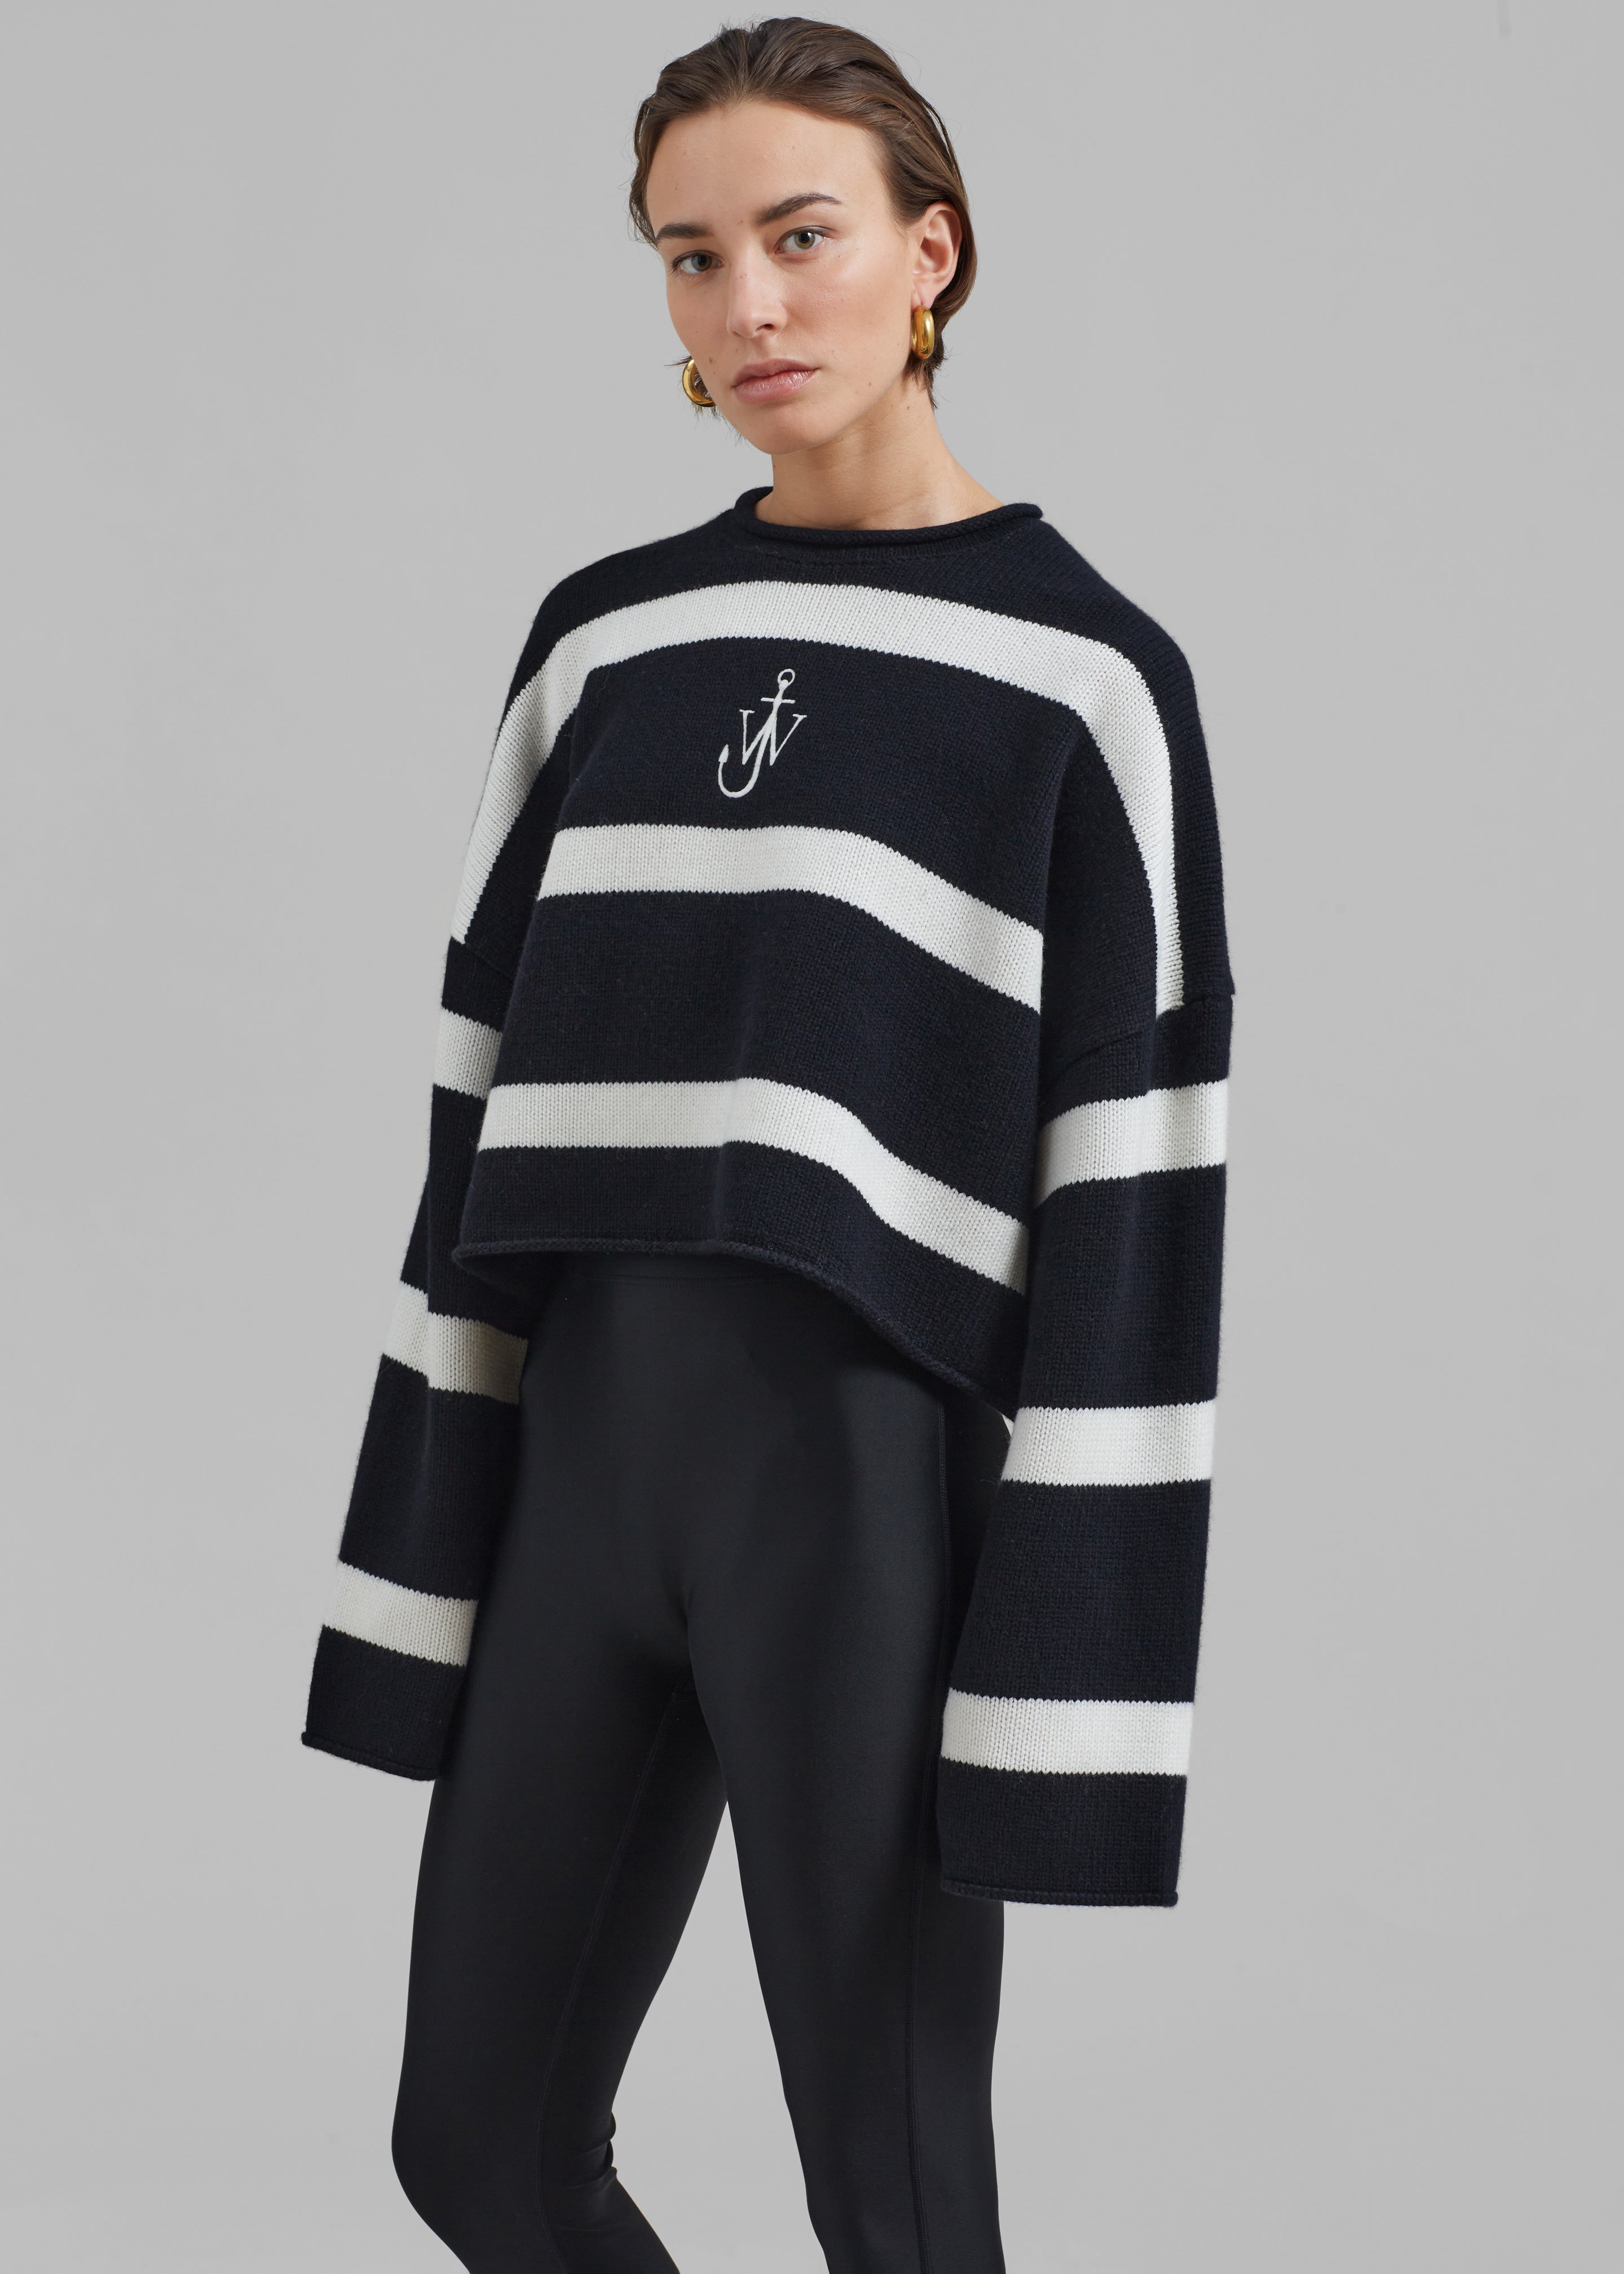 JW Anderson Cropped Anchor Jumper - Black/White – The Frankie Shop